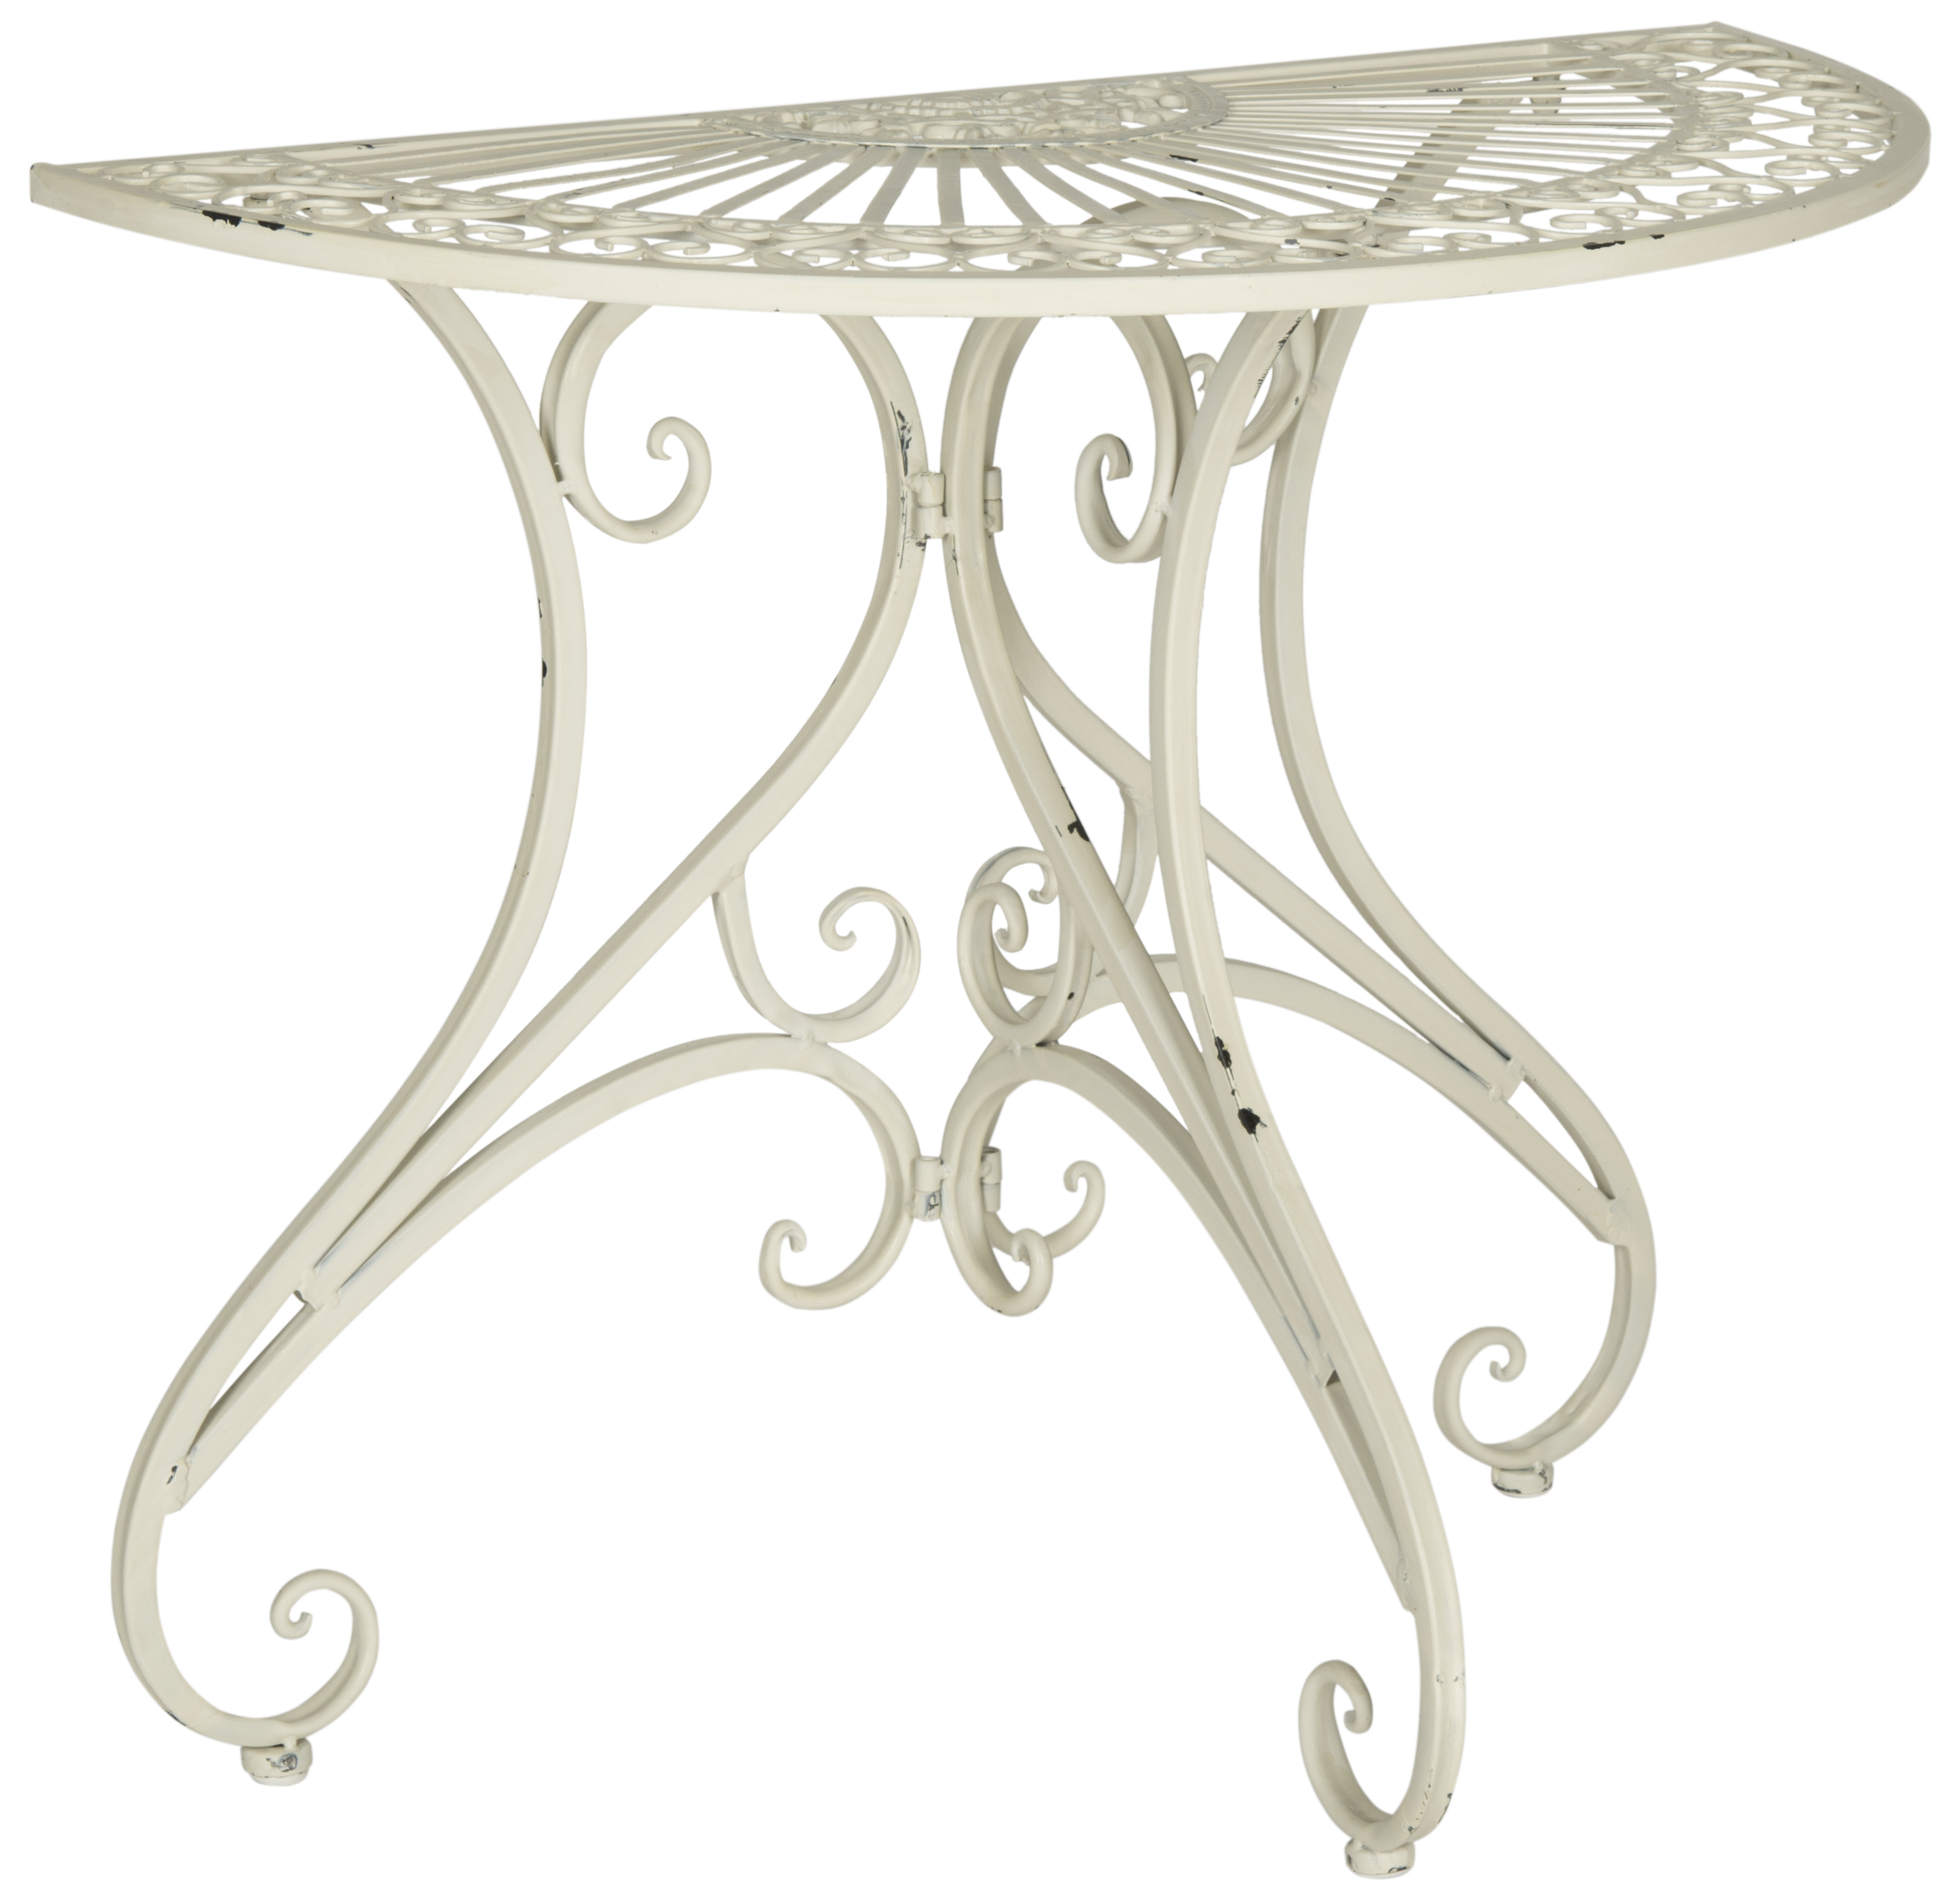 SAFAVIEH Annalise Outdoor Patio Semi-Circle Accent Table, Antique White - image 2 of 5